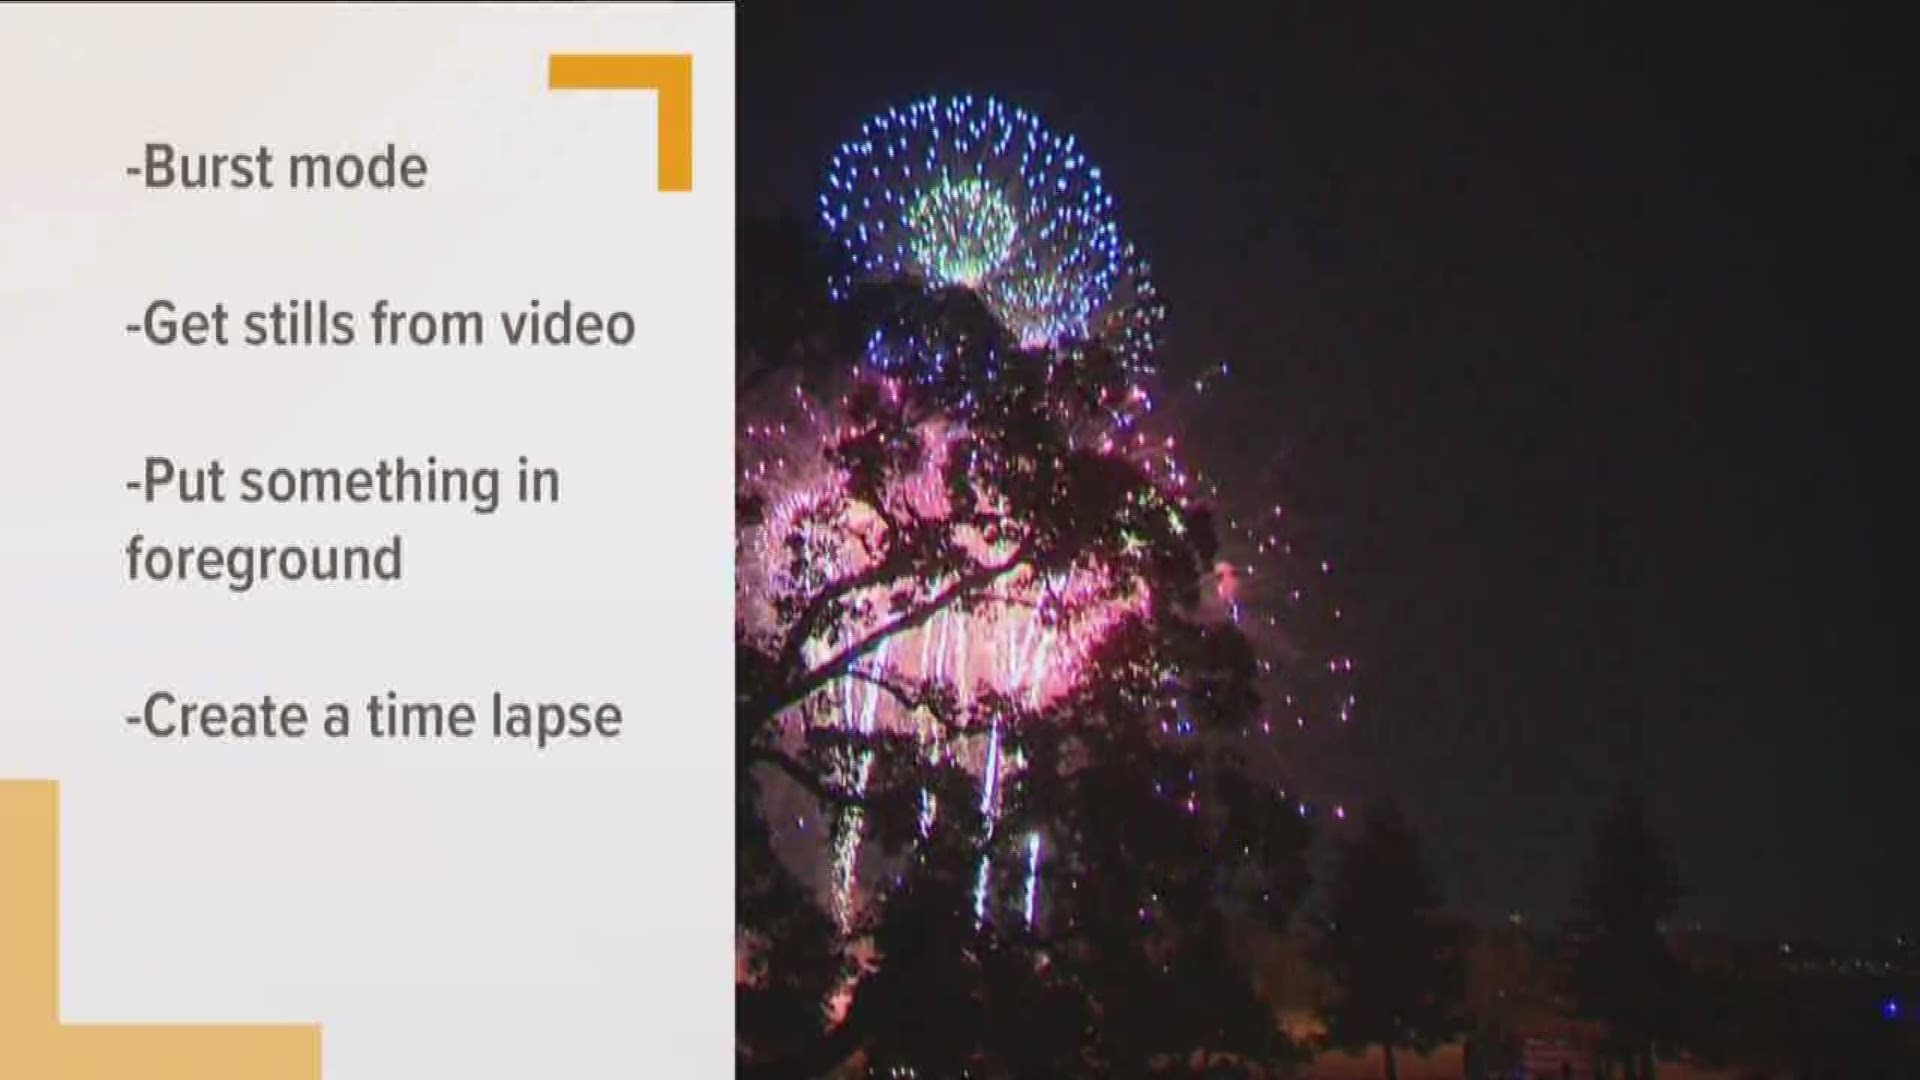 Here's how you can get the best shots of those fireworks with your smartphone.